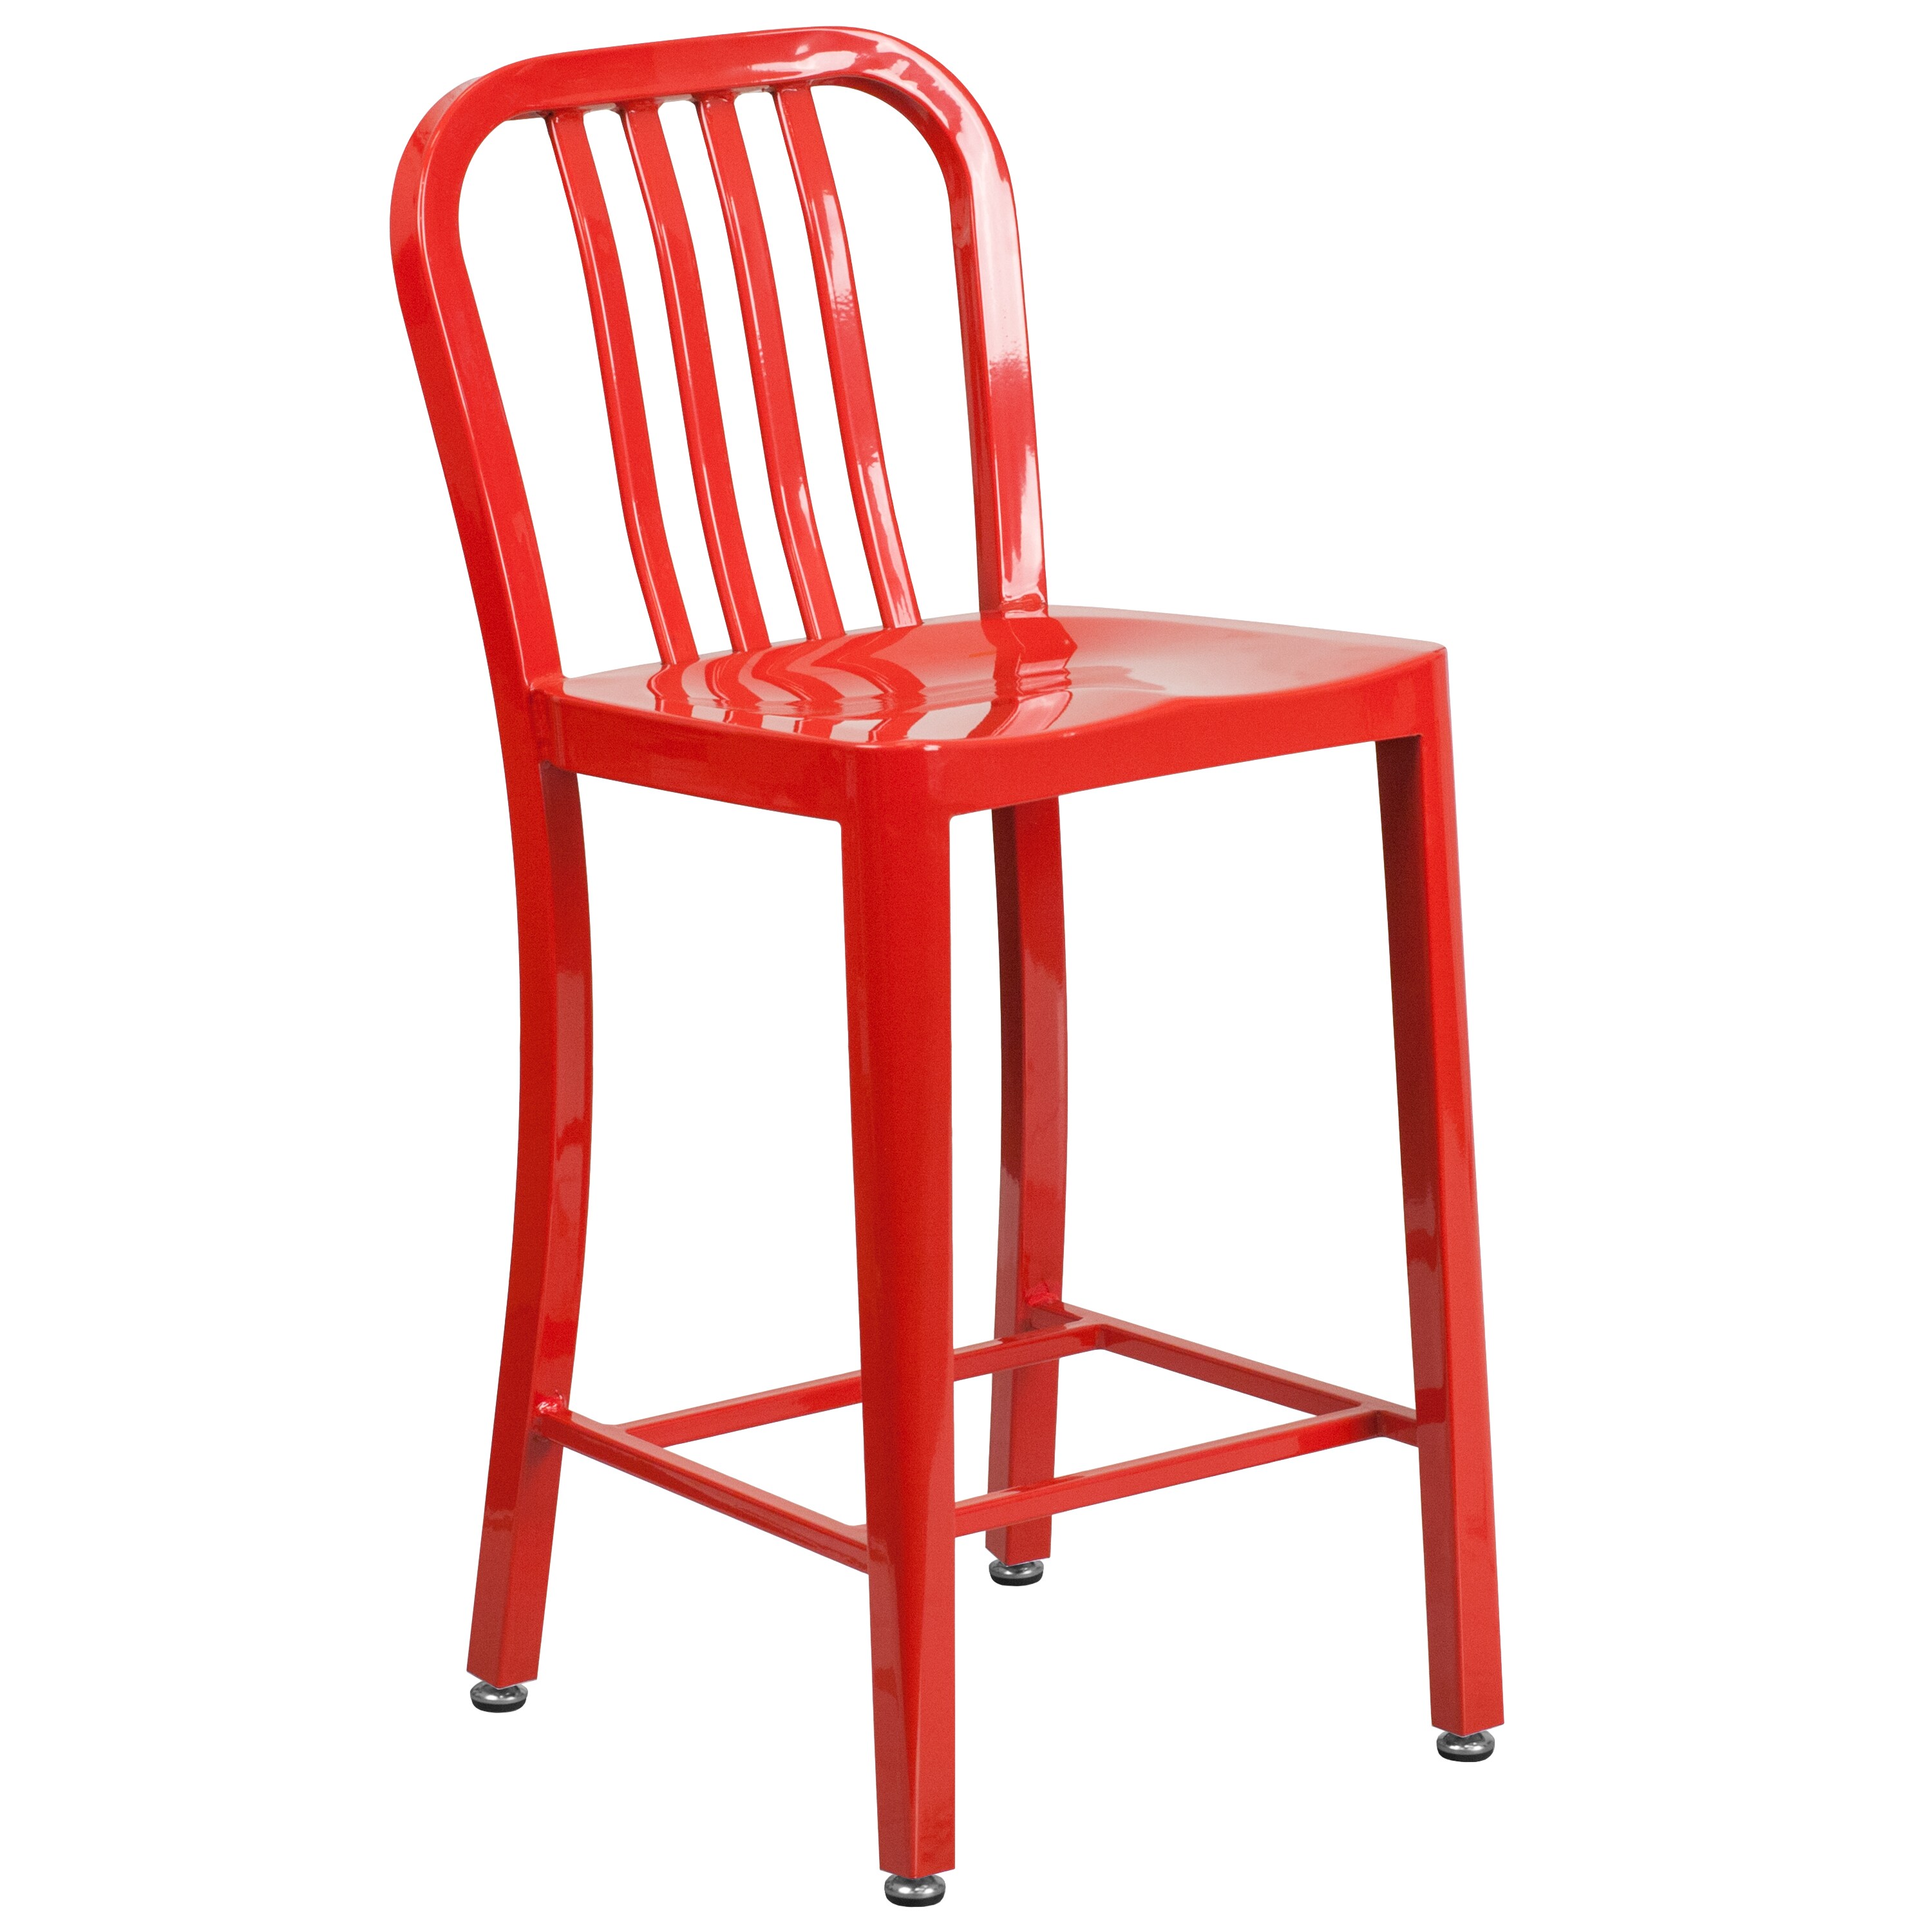 Bar Stool In The Stools, Red Bar Stool Chairs